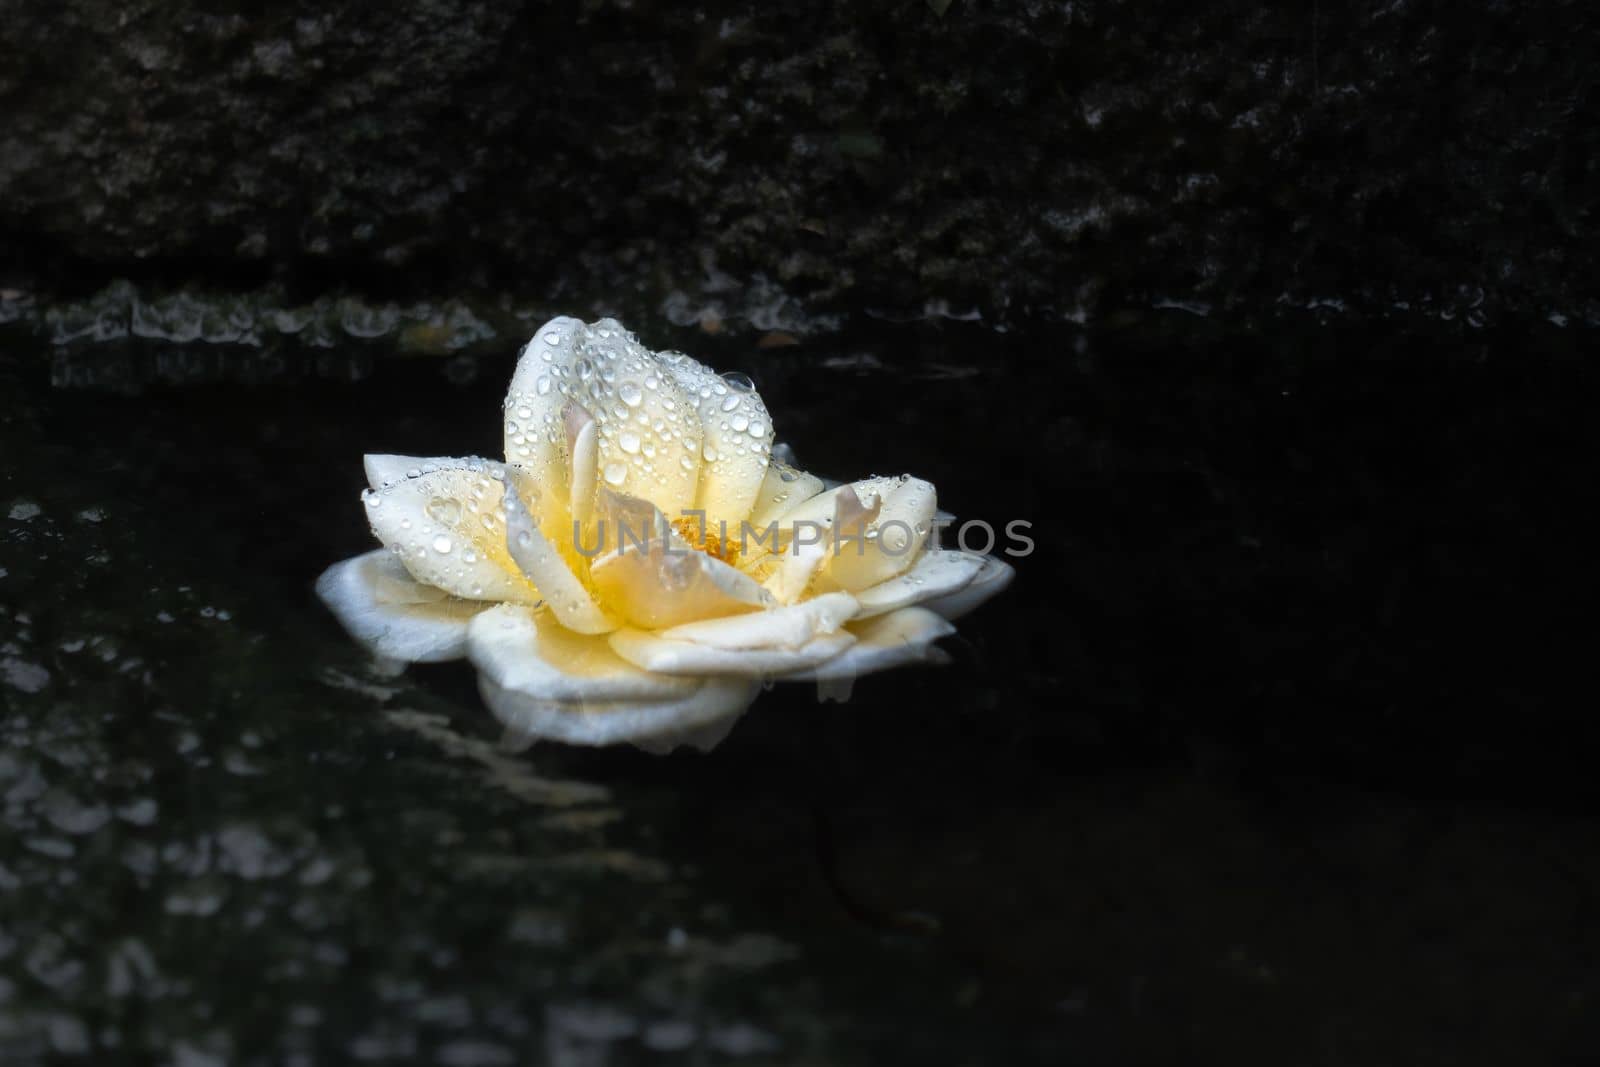 A cut off yellow rose blossom wetted with drops from the morning dew floats in a small garden pond.